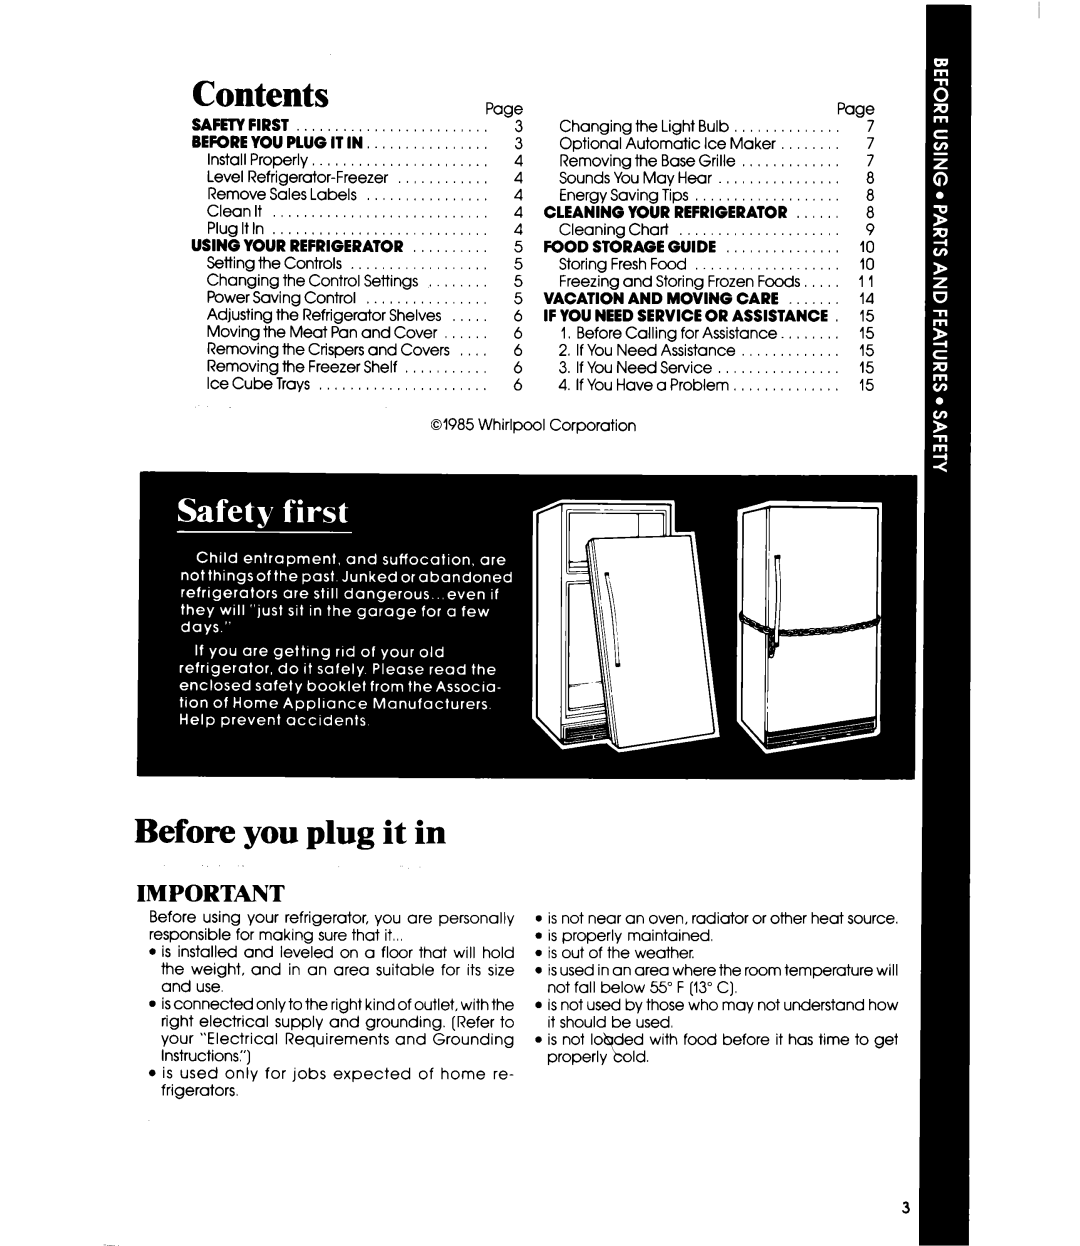 Whirlpool ETl4EP manual Before you plug it in, Contents 